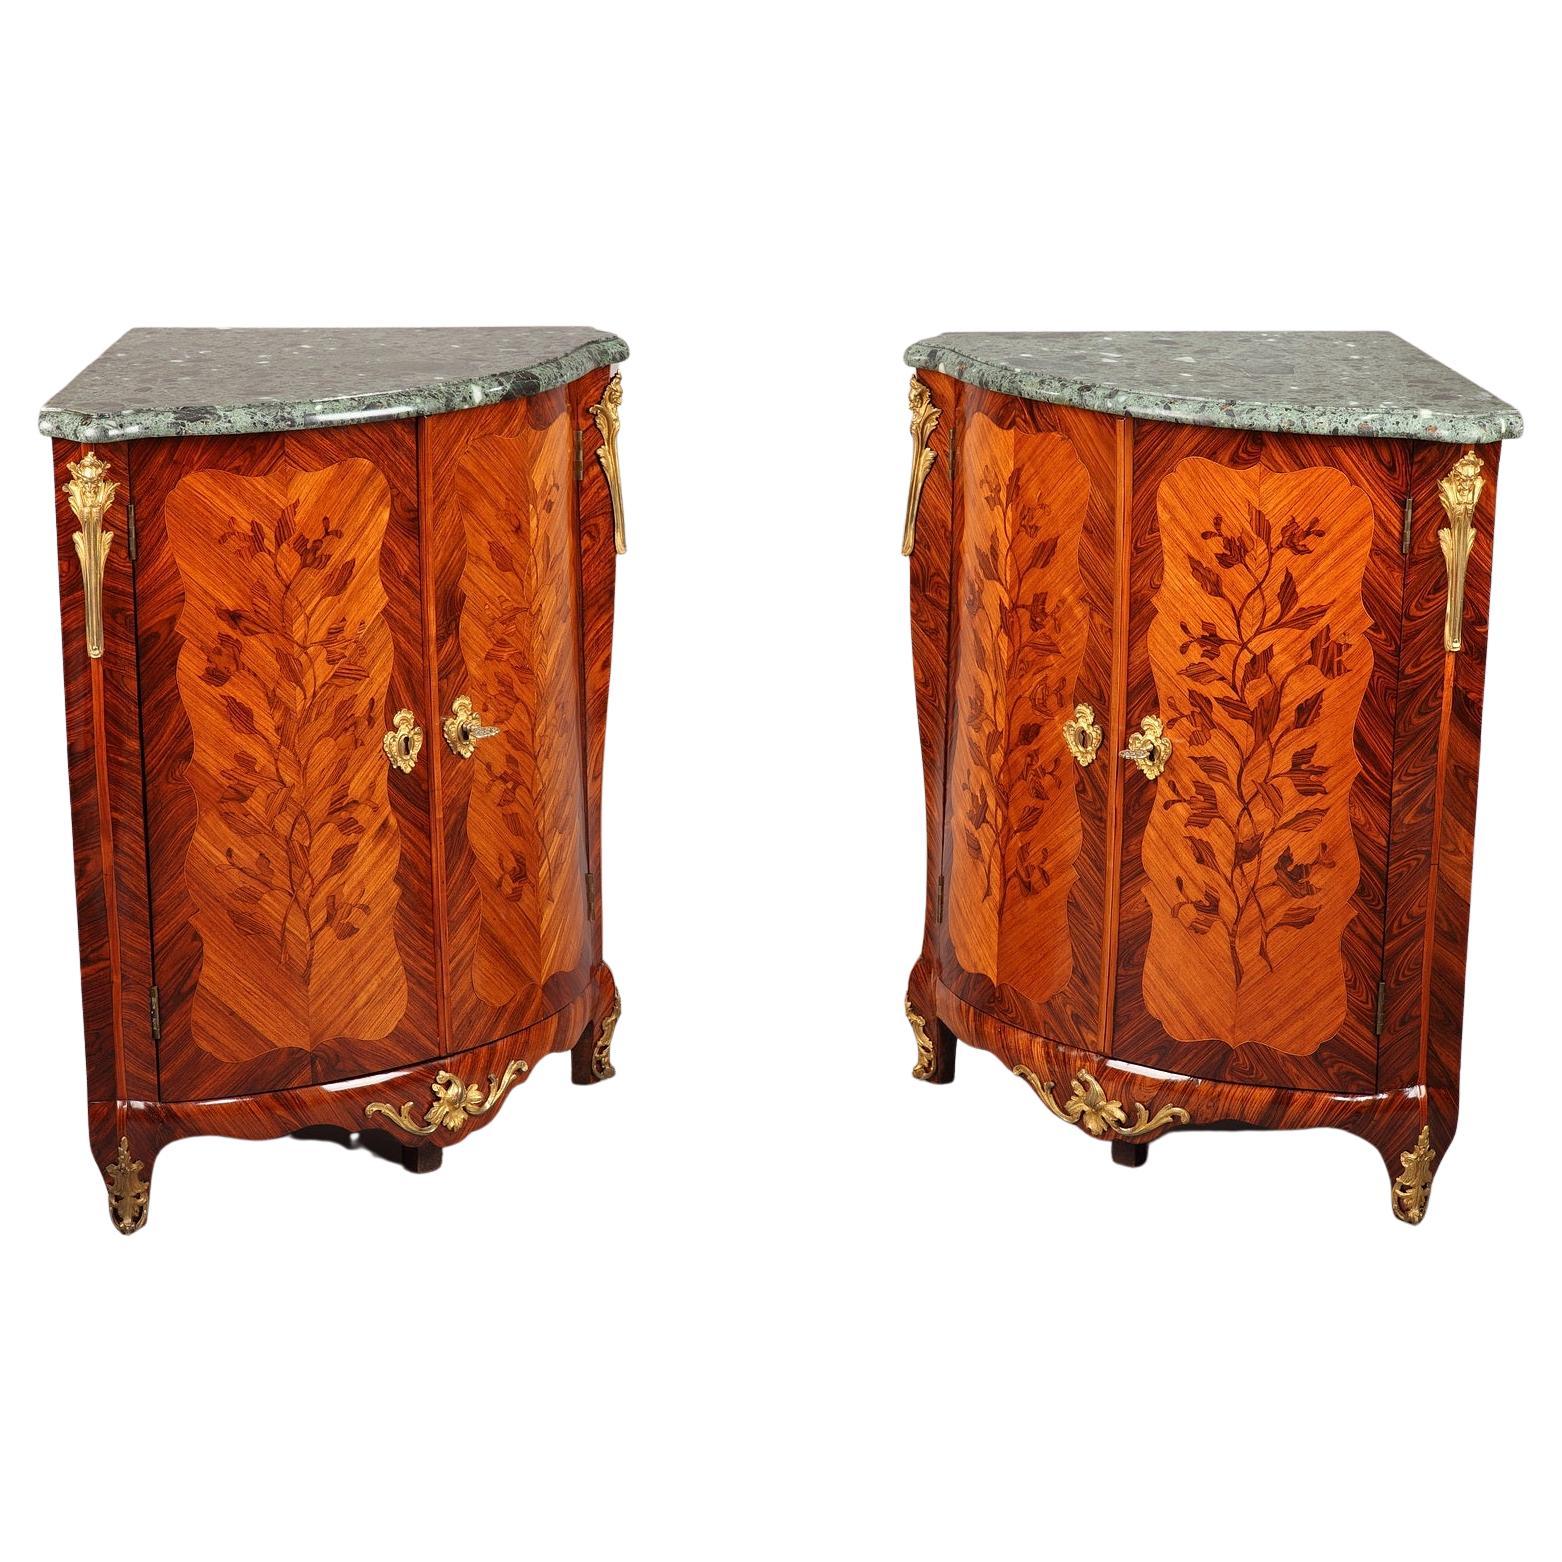 Pair of Corner Cabinets with Flower Marquetry--Louis XV Period